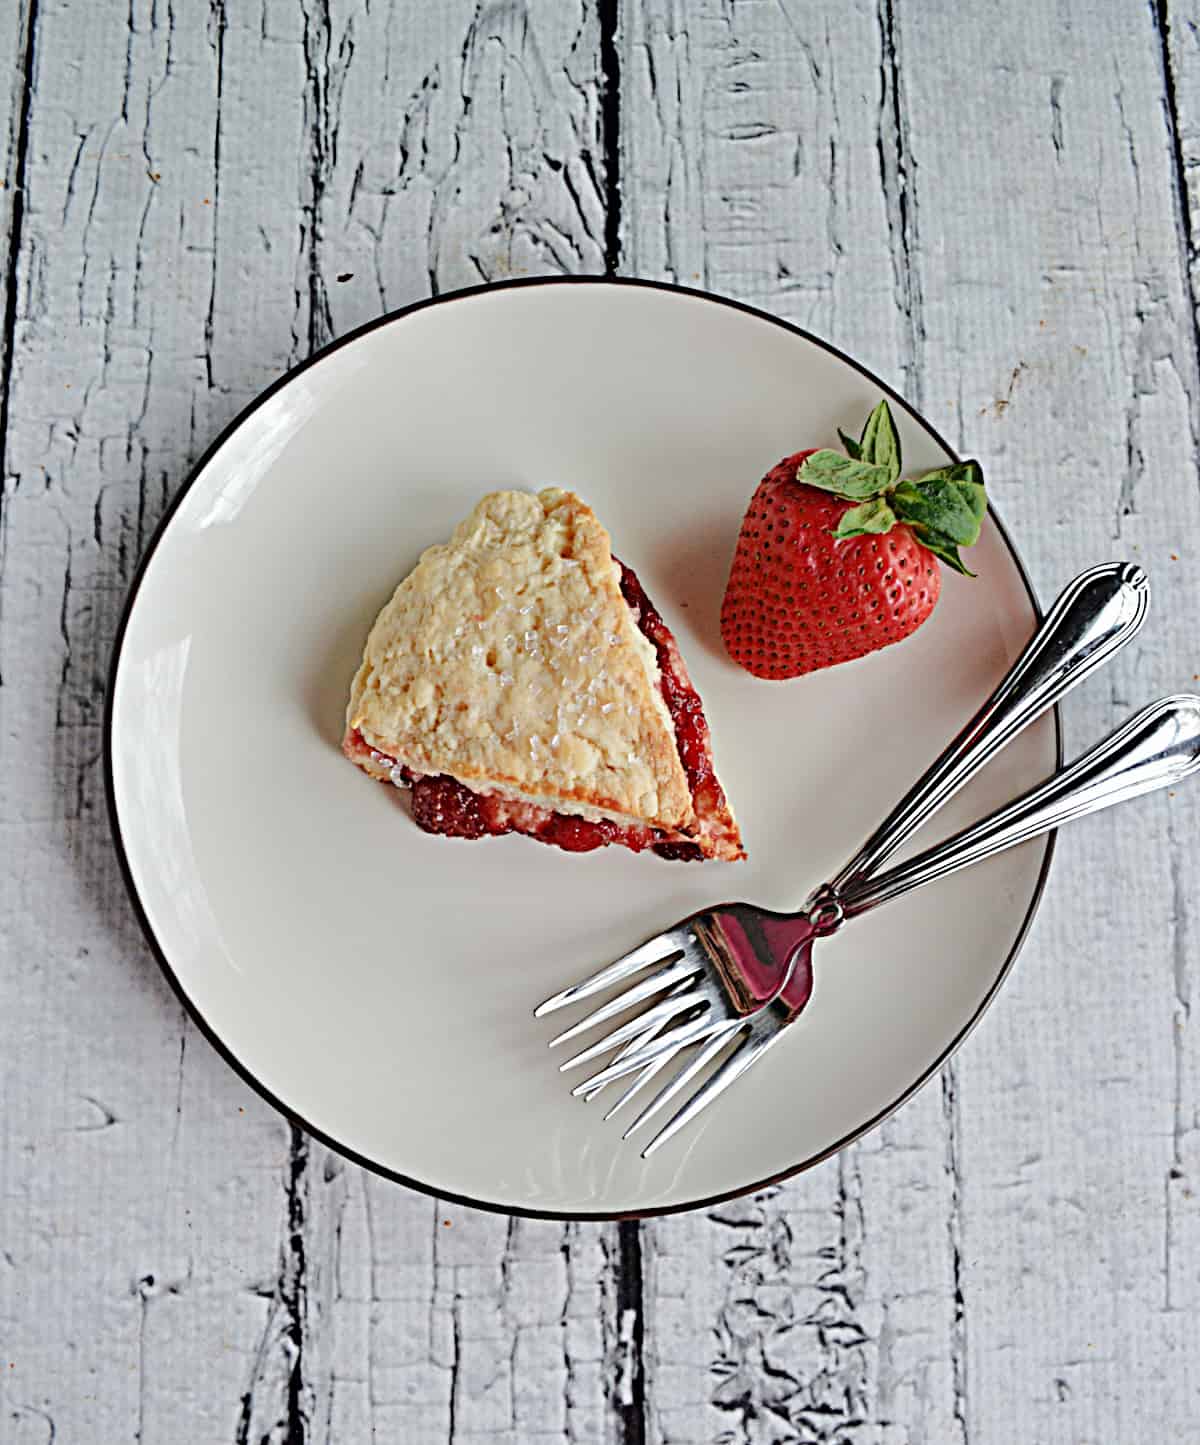 A plate with a scone on it with two forks and a fresh strawberry.